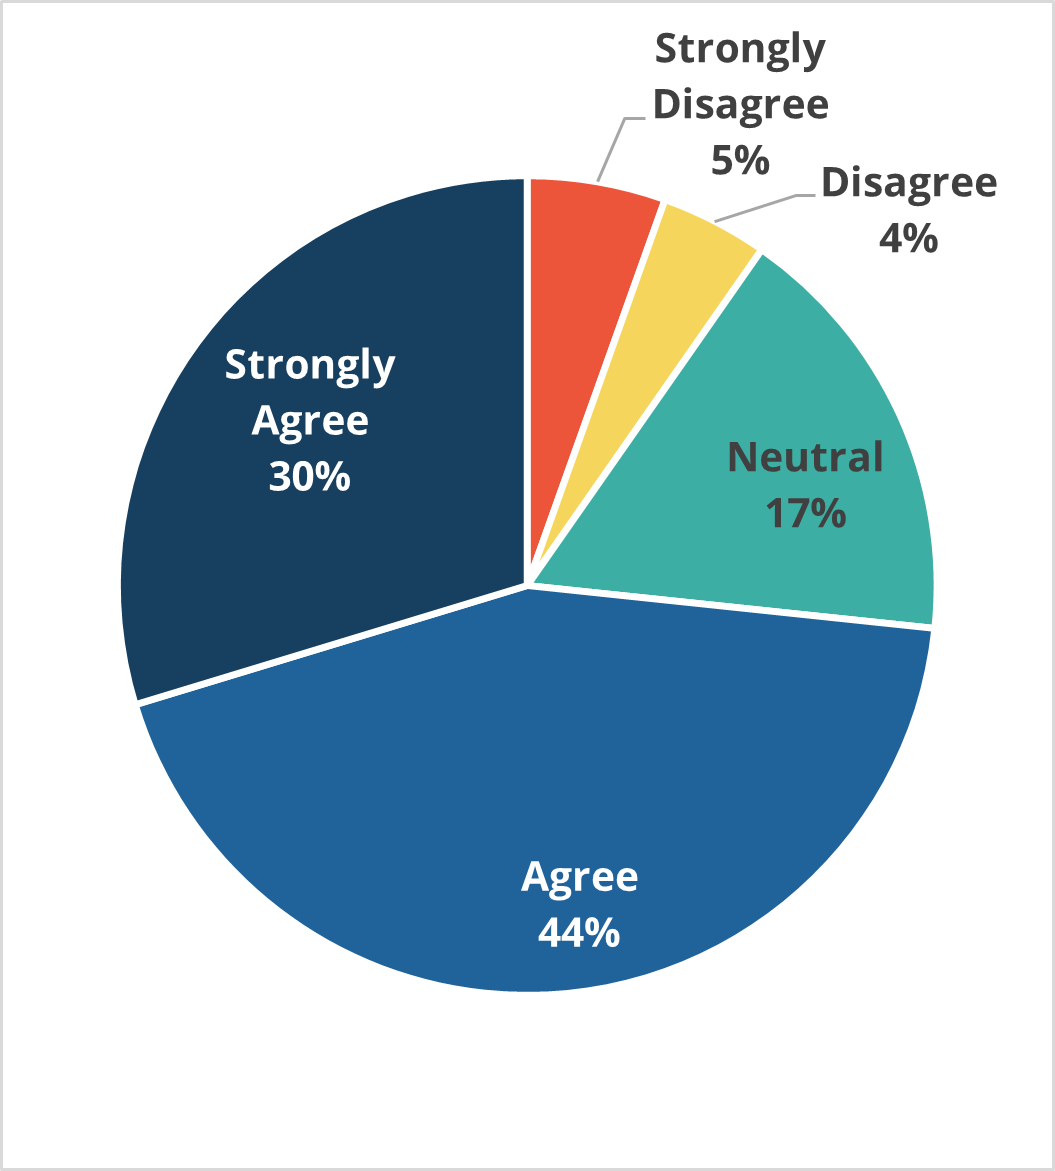 Graph of responses to whether Ventus was valuable in managing accommodations with 30% strongly agreeing, 44% agreeing, 17% remining neutral, 4% disagreeing, and 2% strongly disagreeing